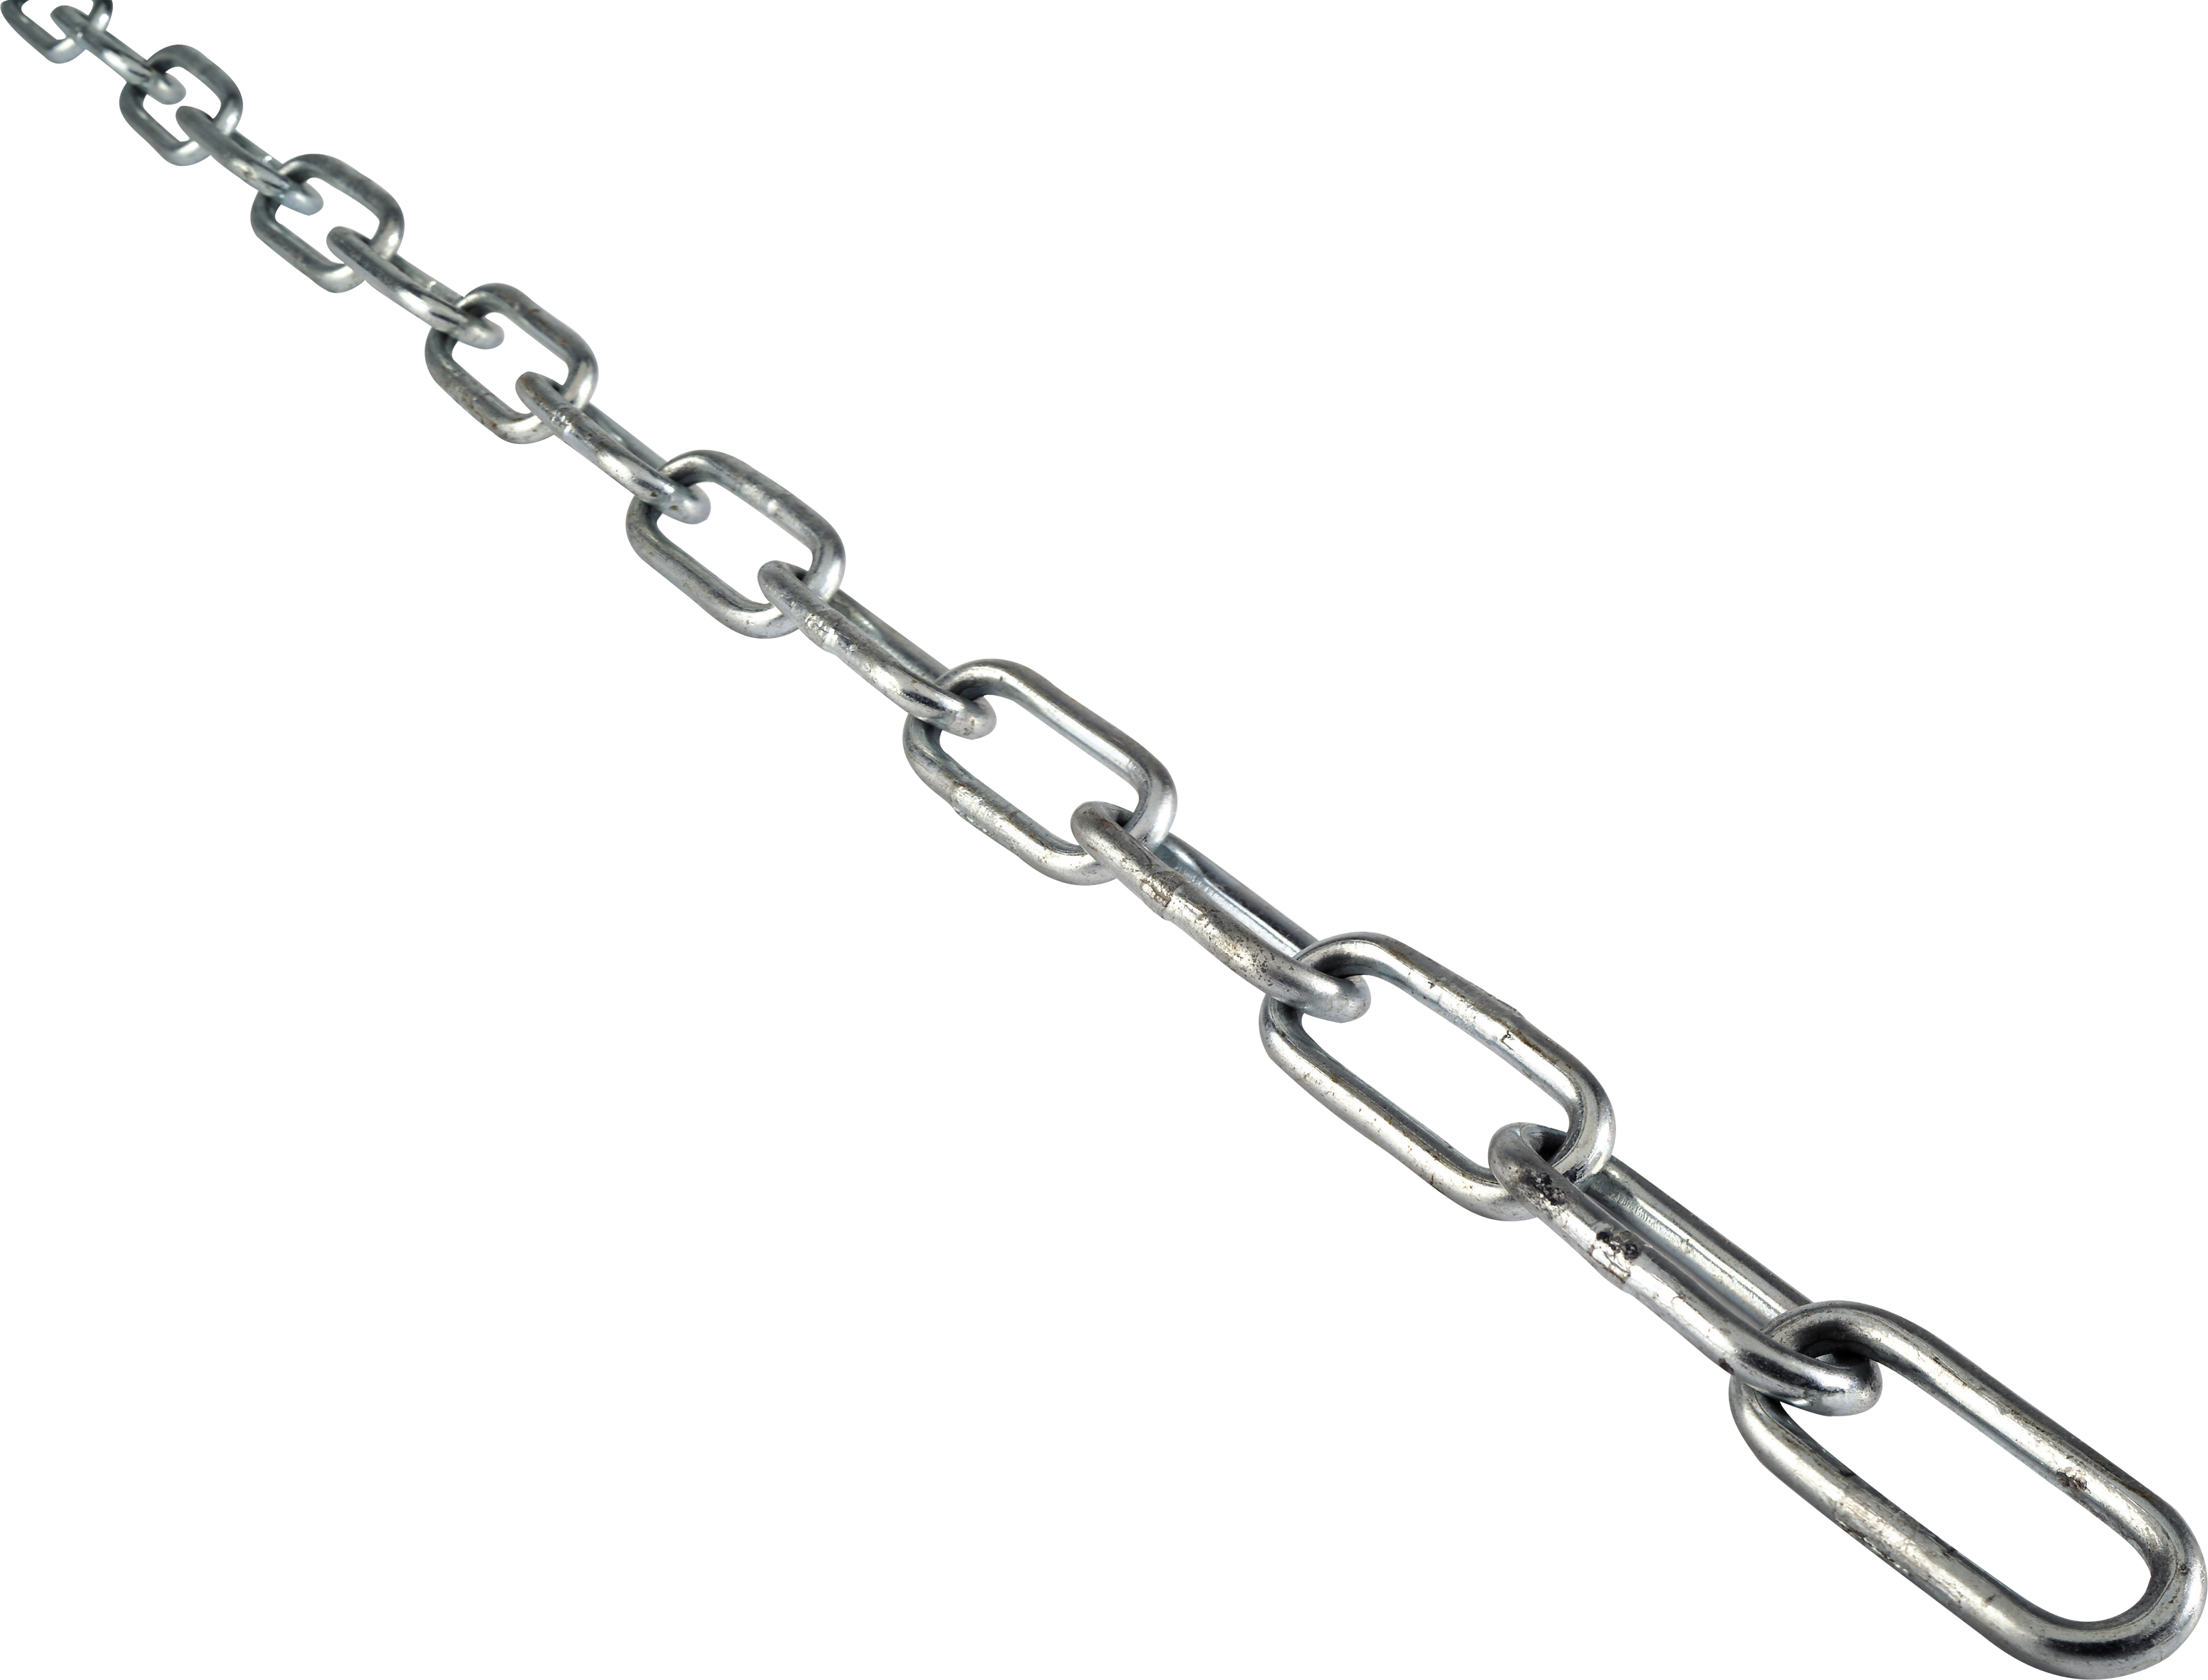 chain background png